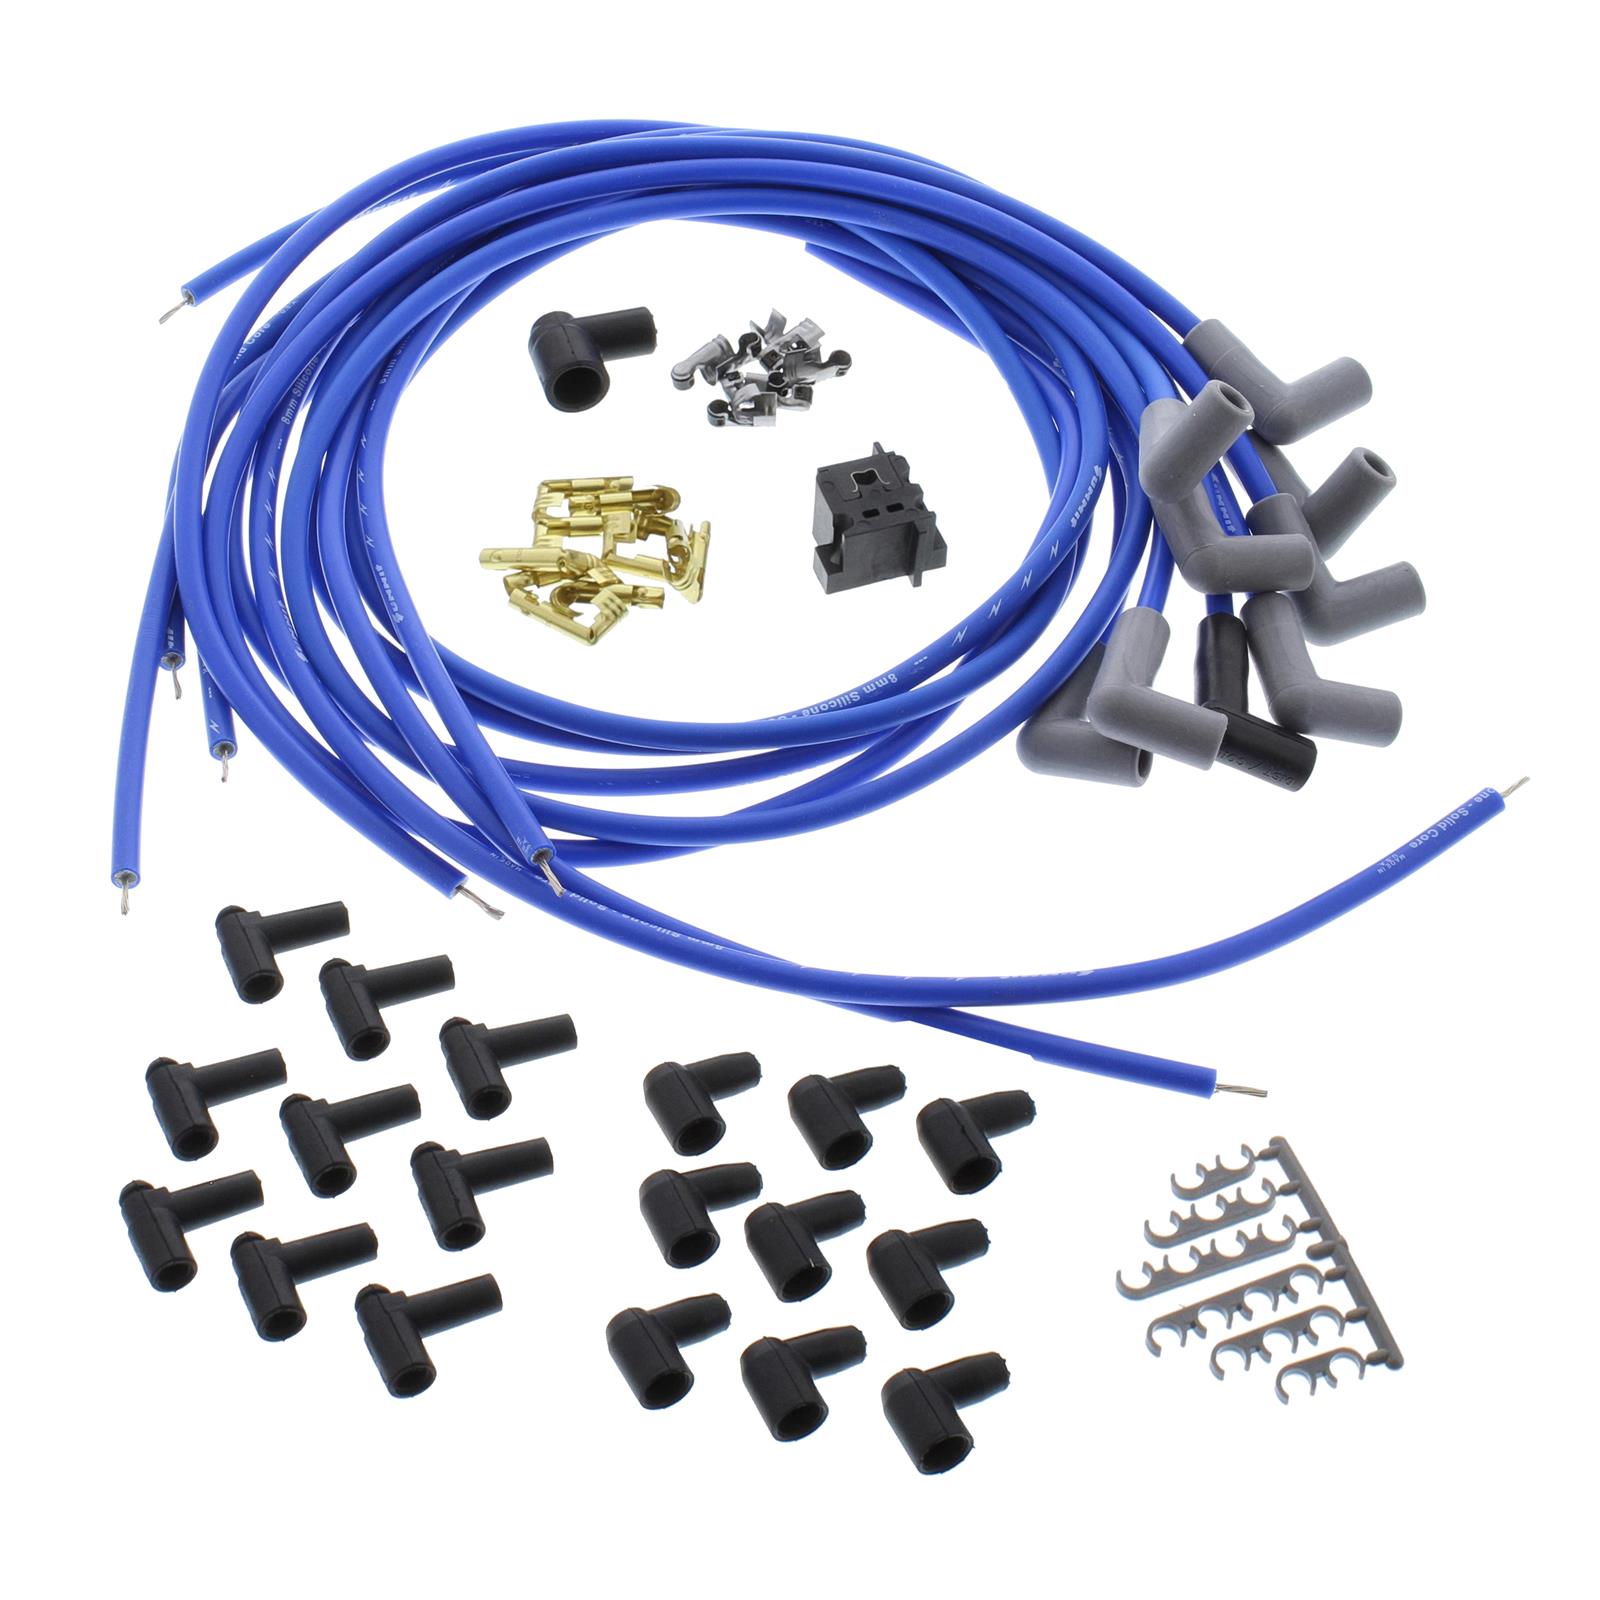 Moroso 52525 Moroso Ultra Ignition Wire Sets | Summit Racing